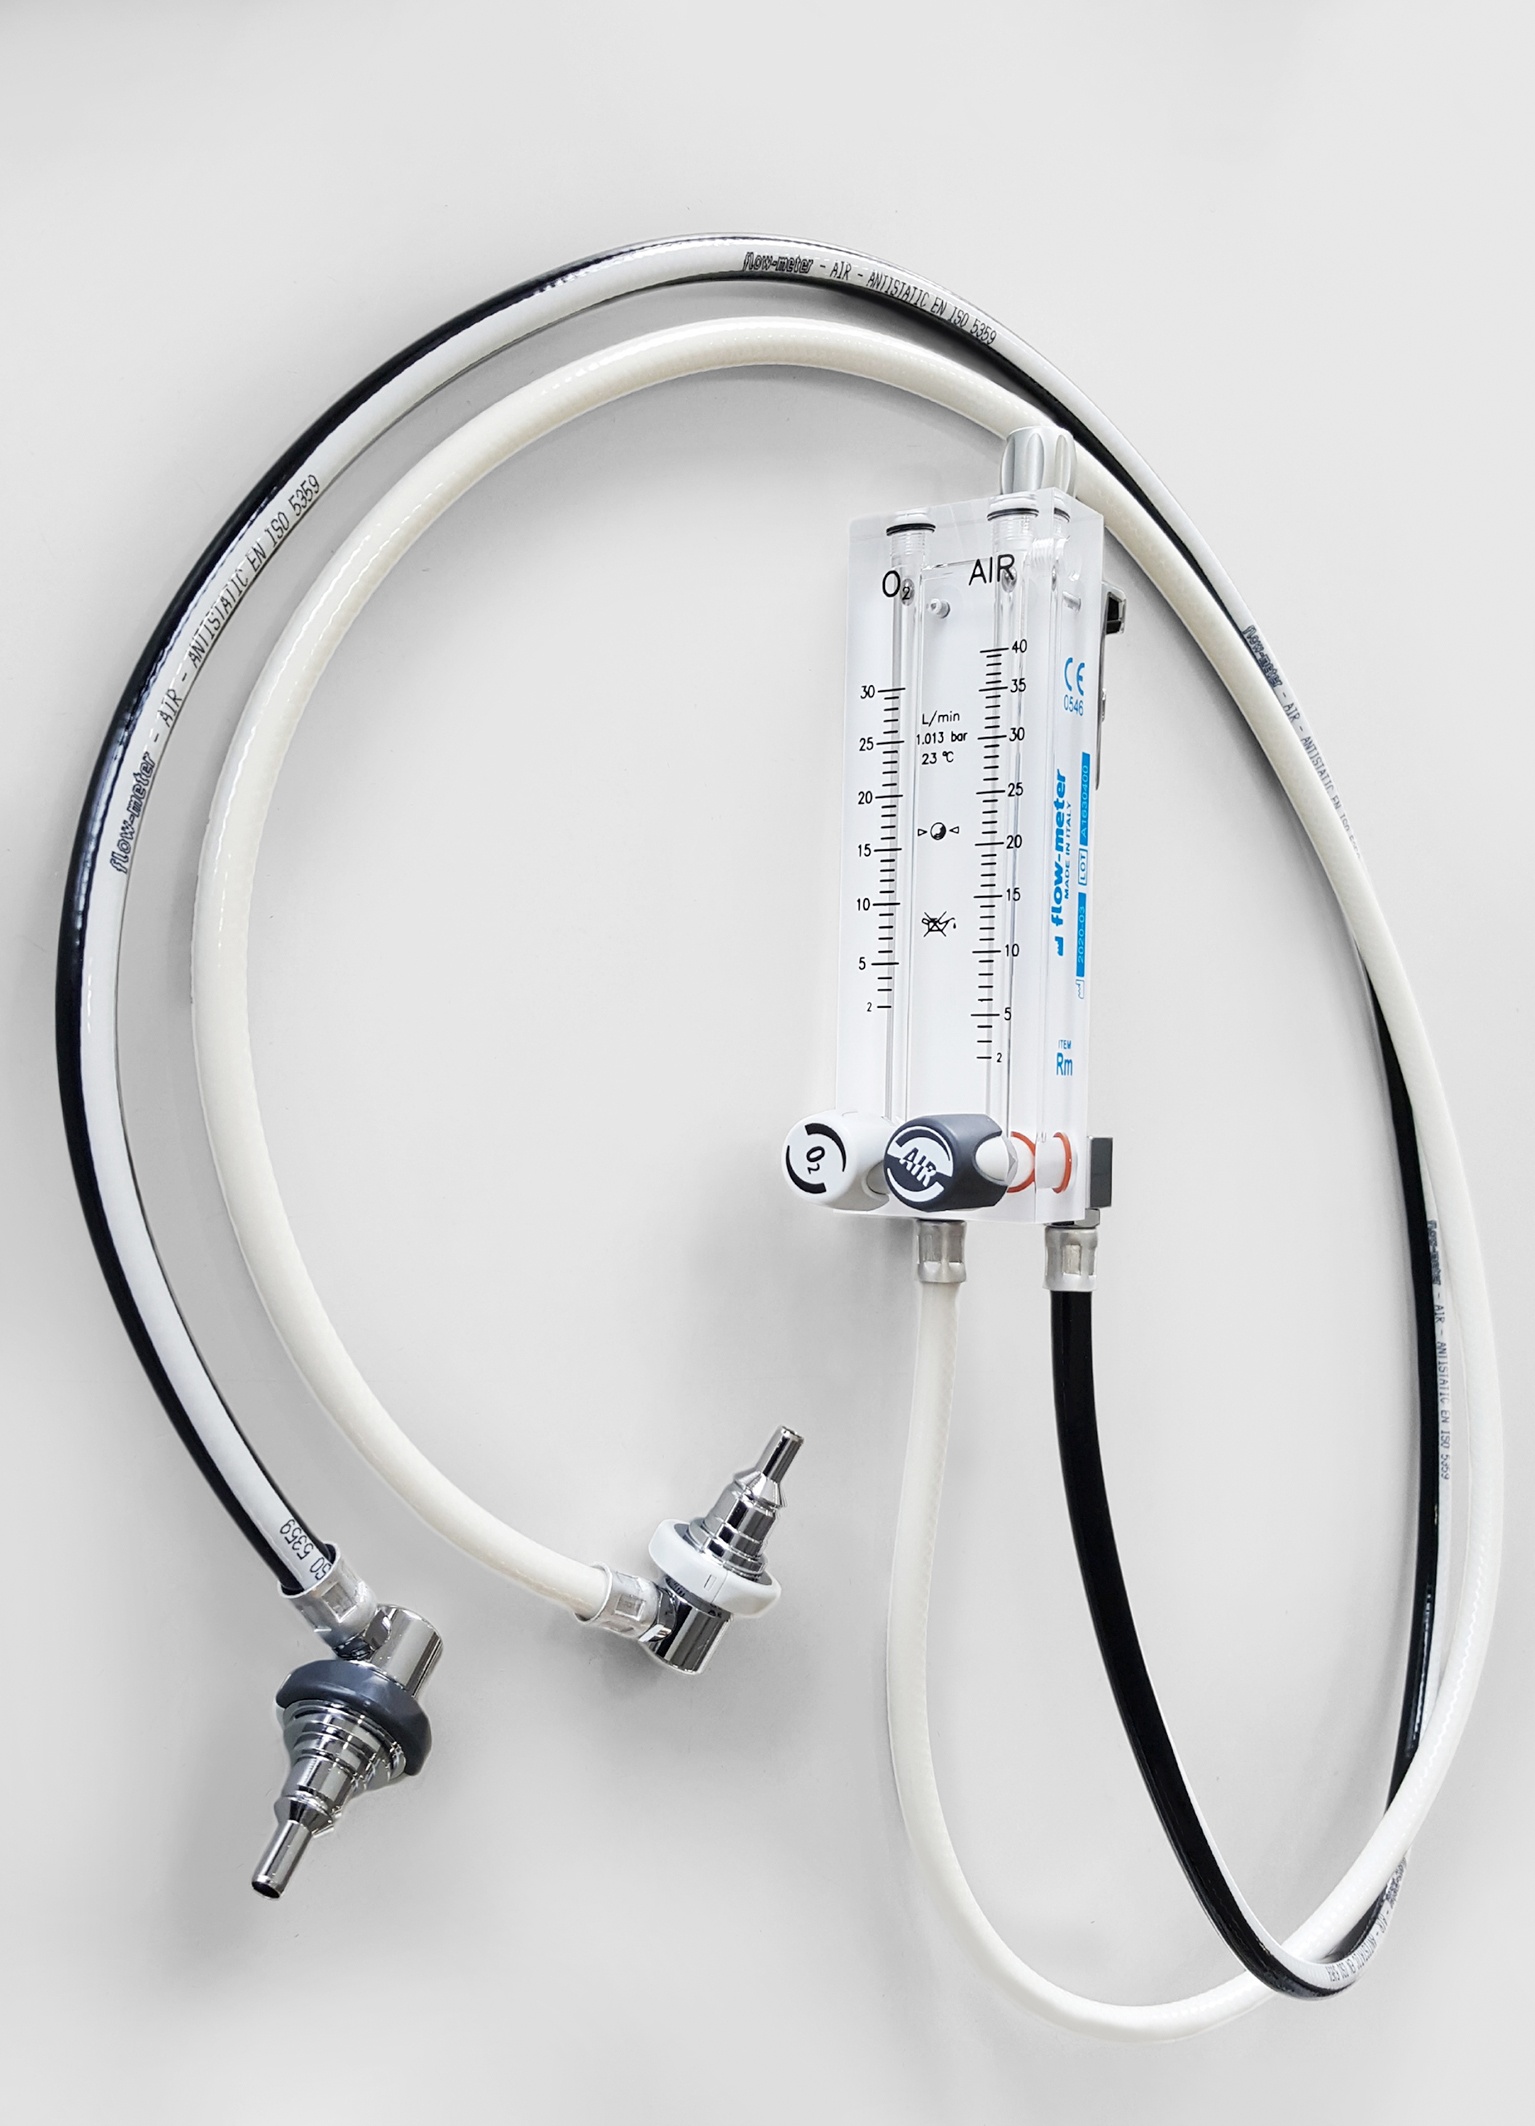 Continental Manufactures Medical Hoses for Healthcare Sector